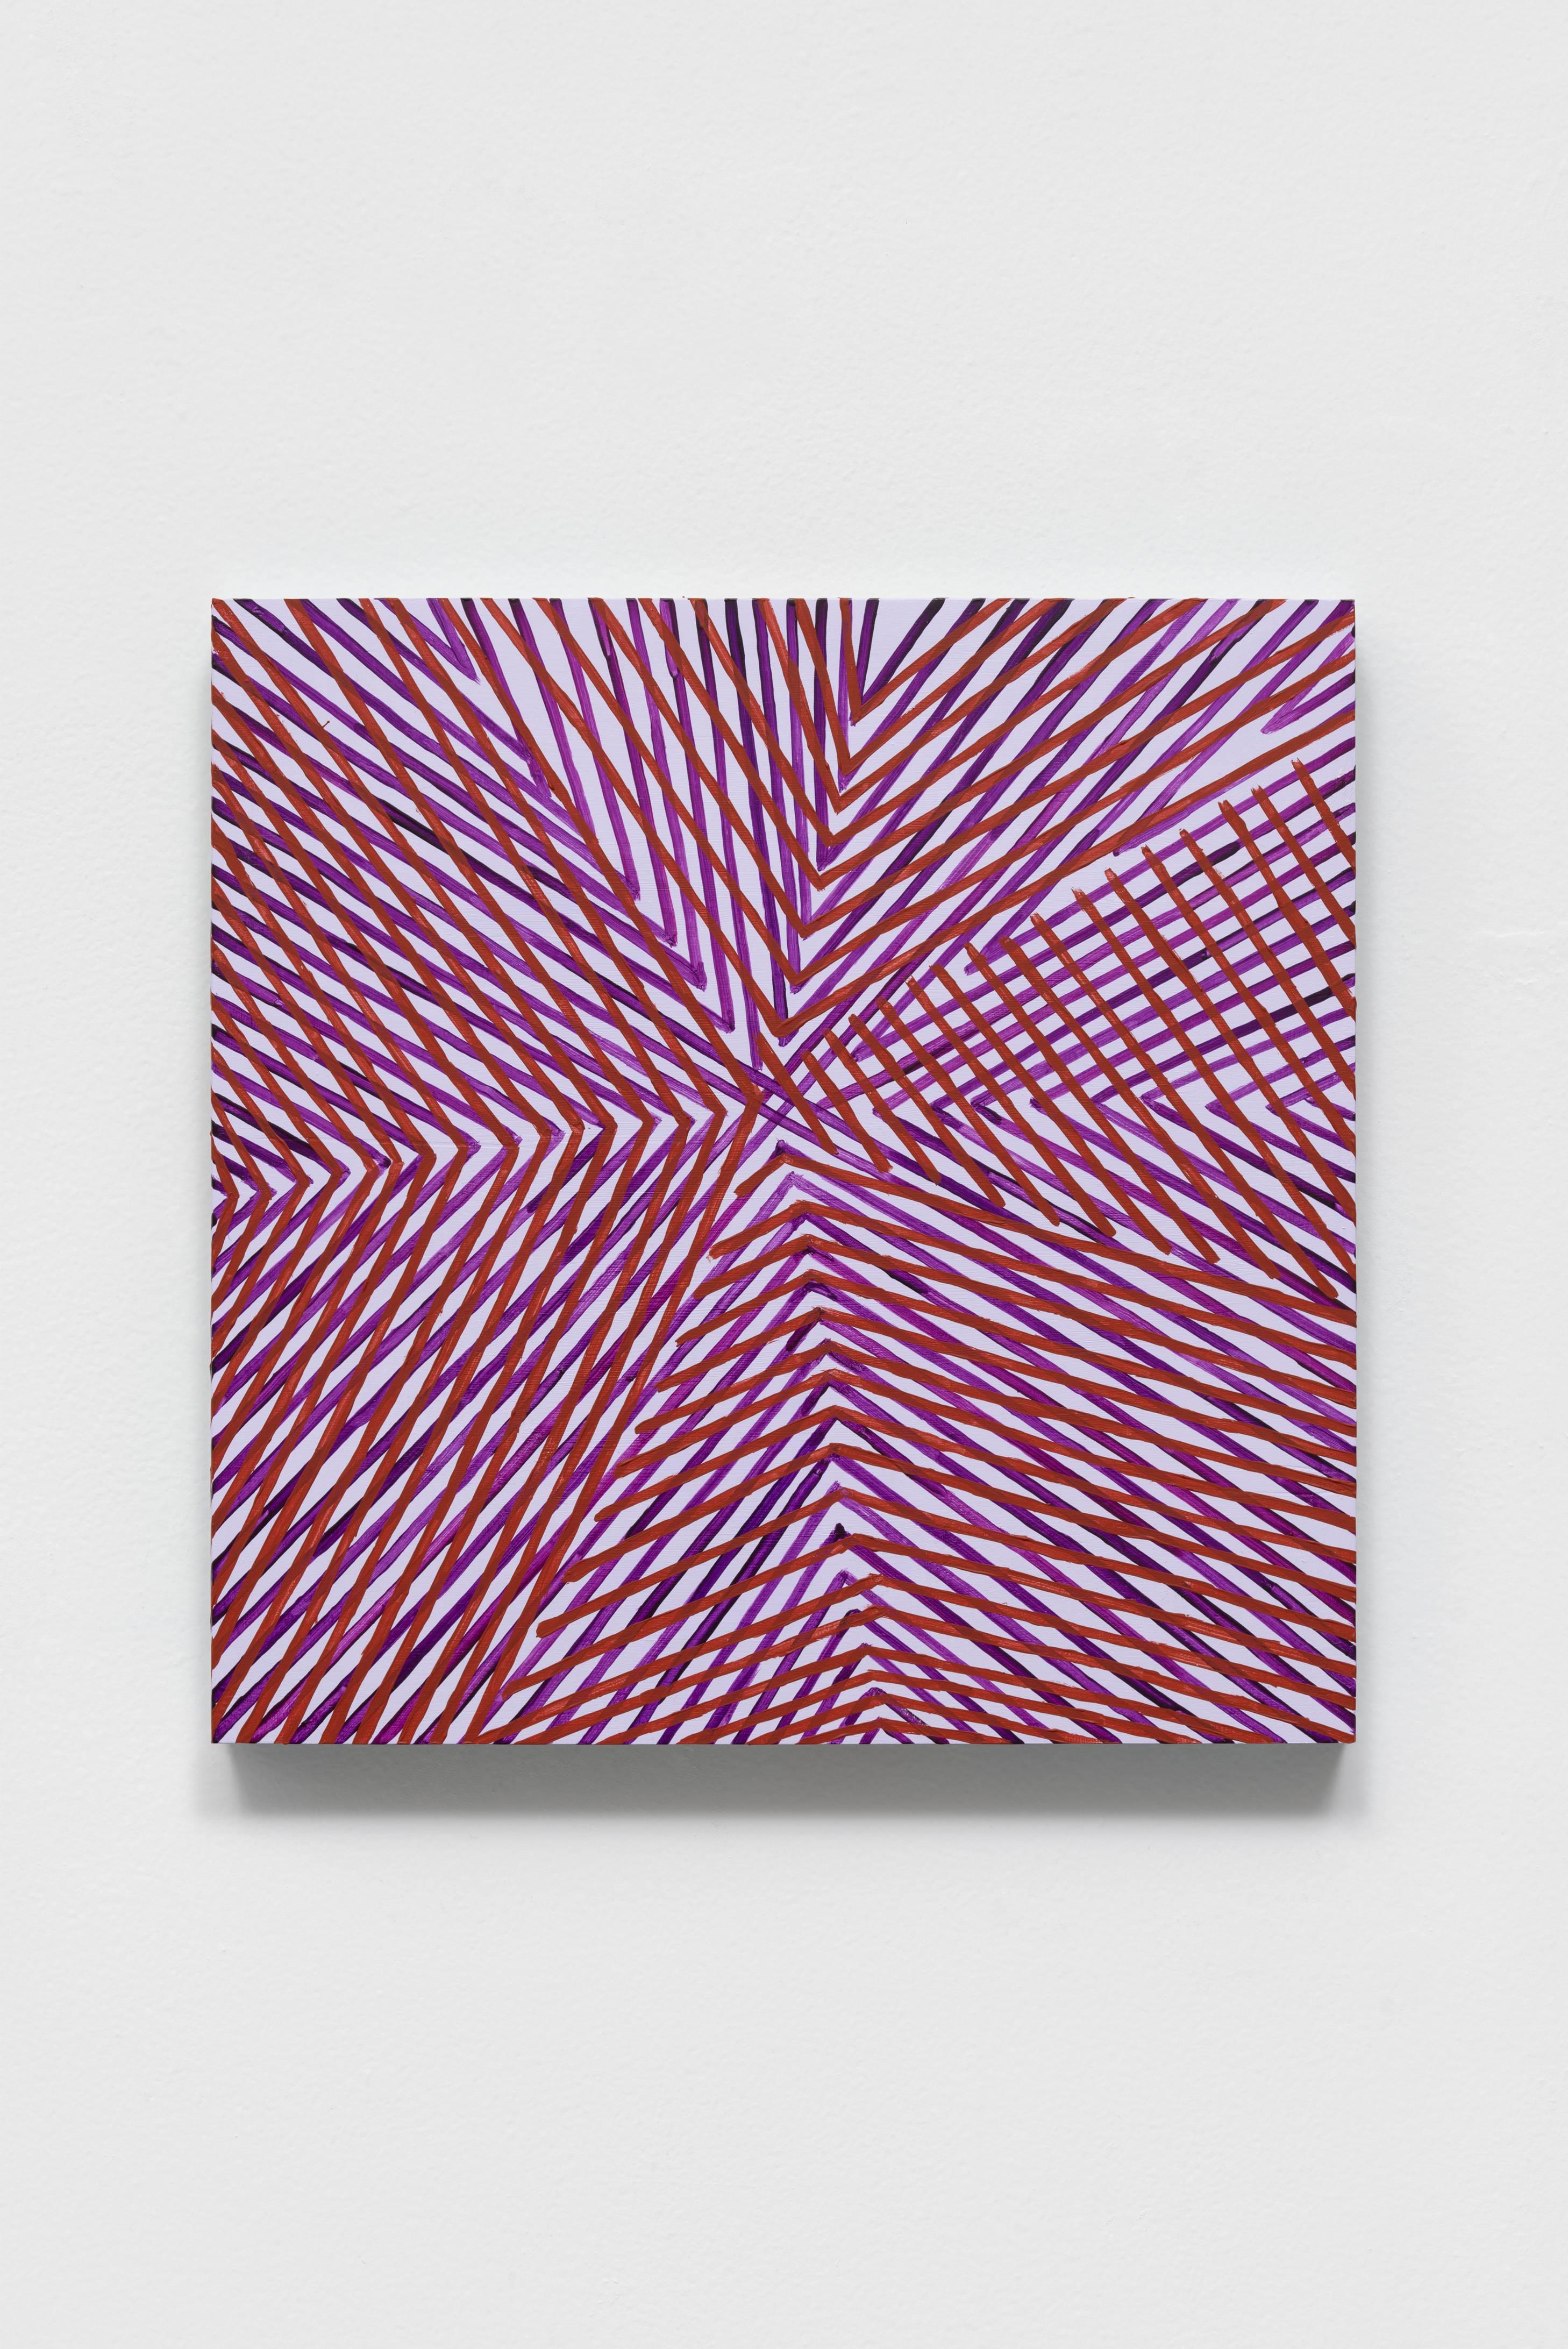 Mel Prest Abstract Painting - Red Vines